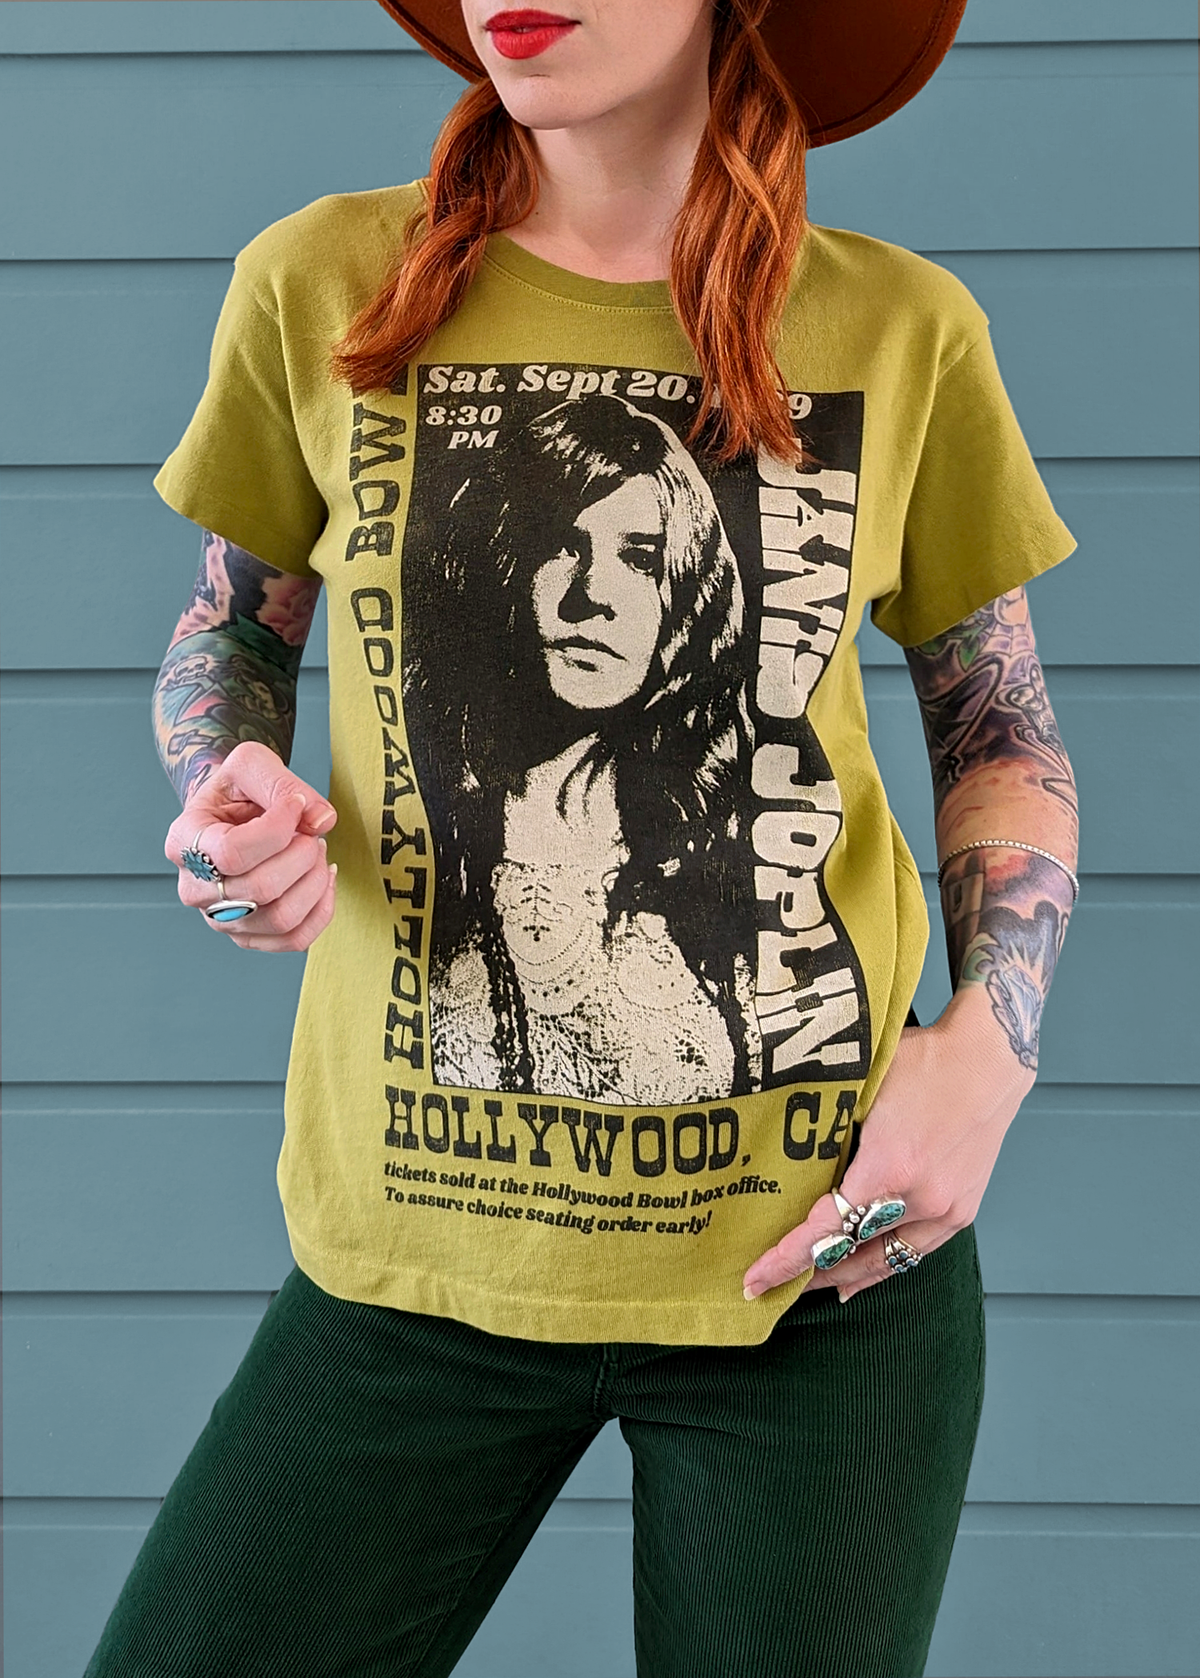 60s inspired Janis Joplin Hollywood Bowl 1969 Concert Poster tee in moss green by daydreamer la, officially licensed and made in california